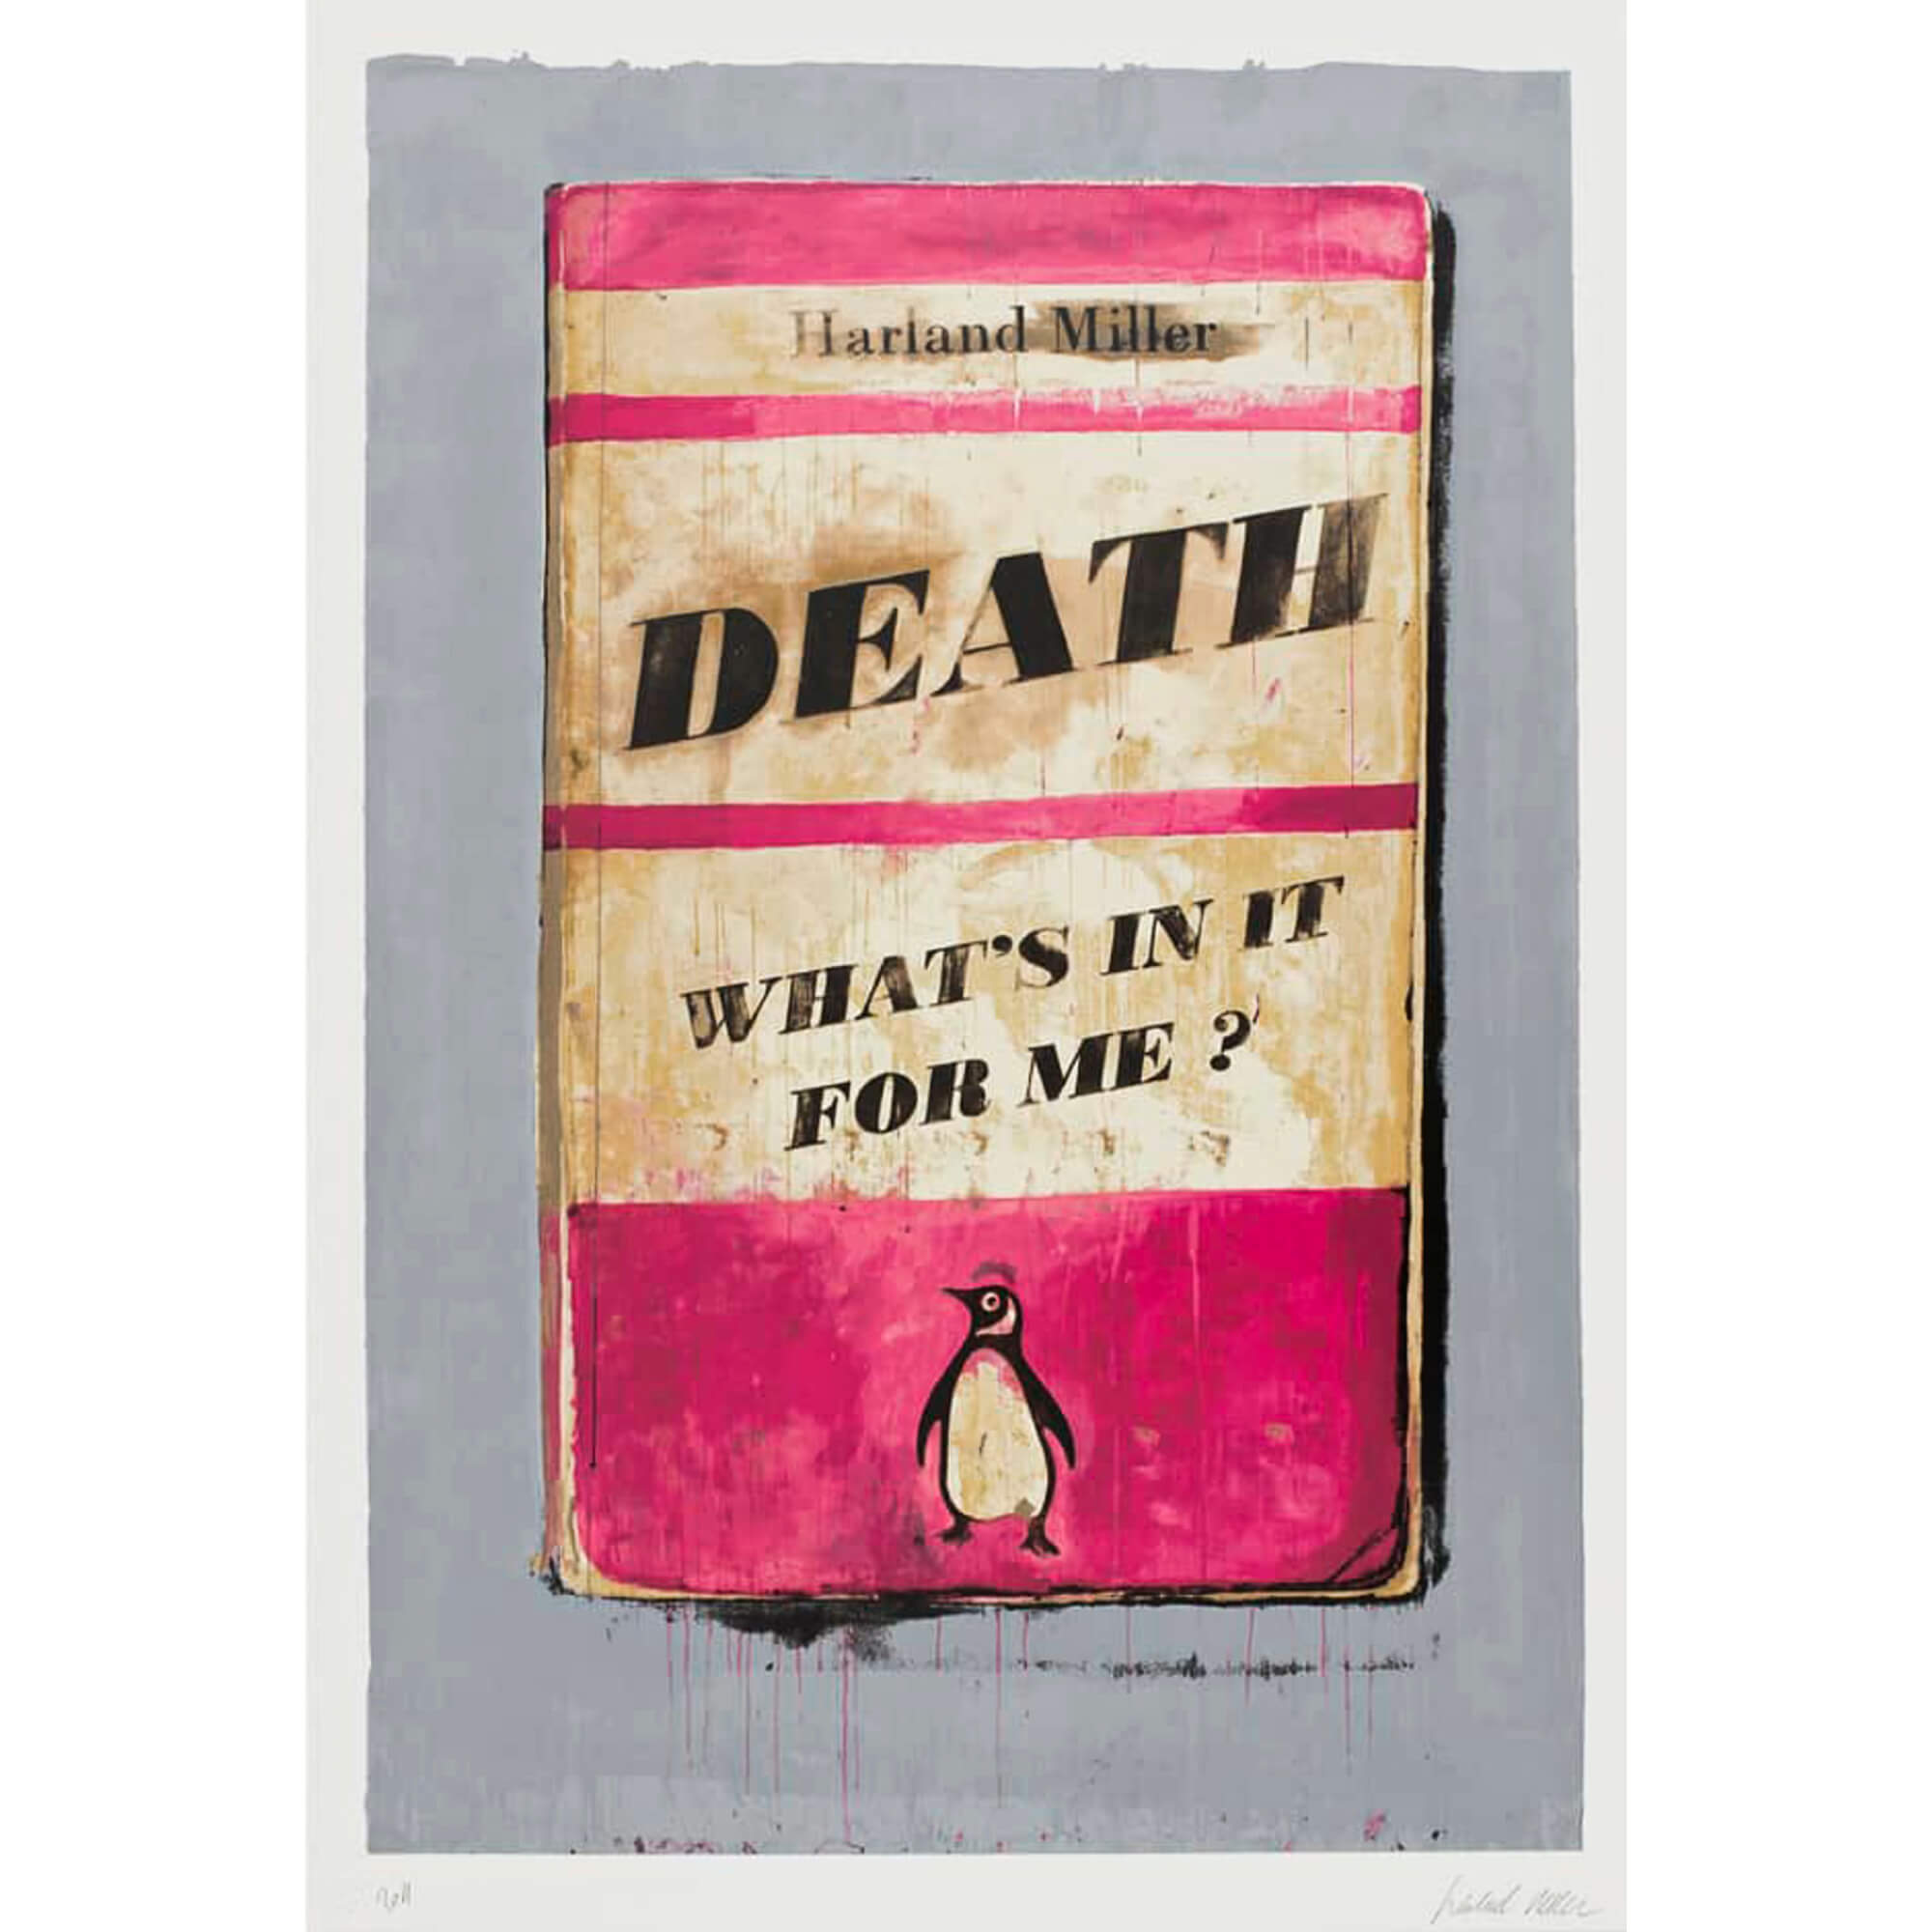 Harland Miller-Death What’s In It For Me? - Harland Miller-art print